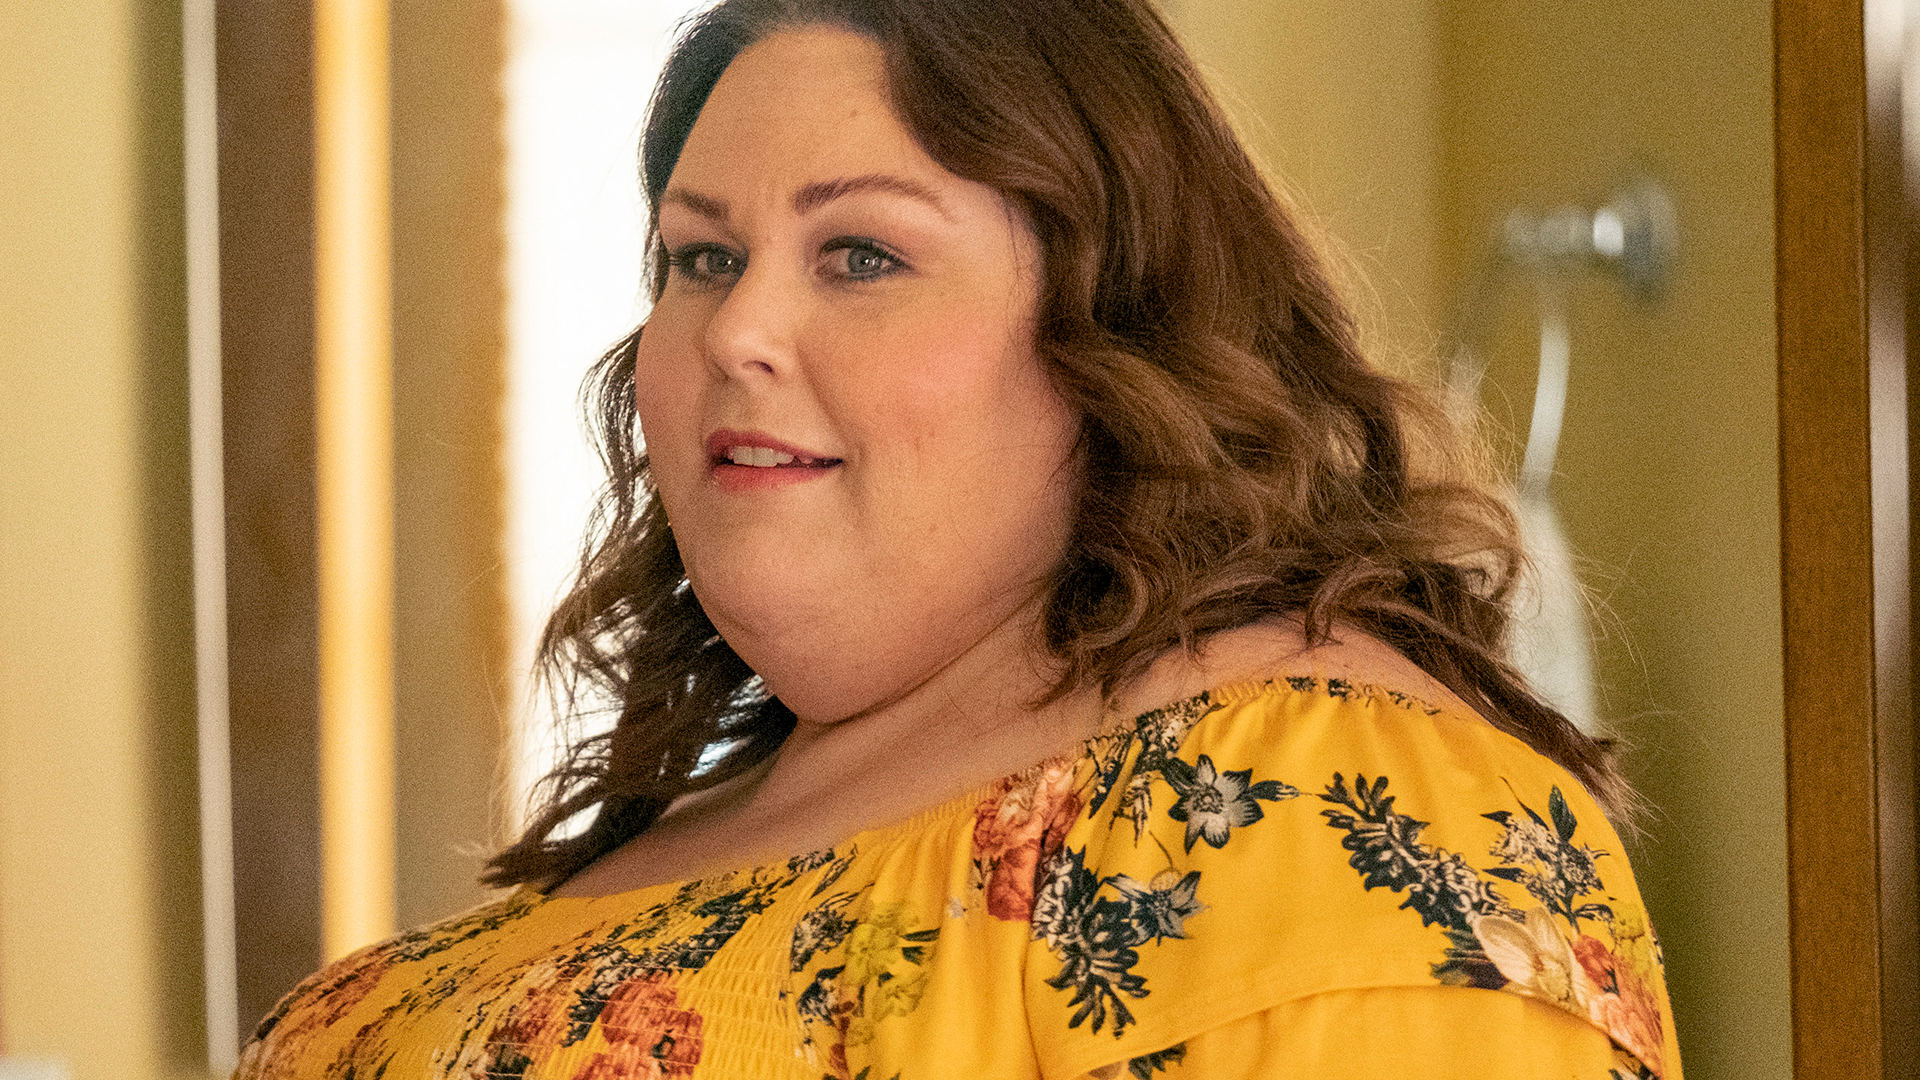 Chrissy Metz as Kate Pearson looking at Toby in ‘This Is Us’ Season 5 Episode 16.